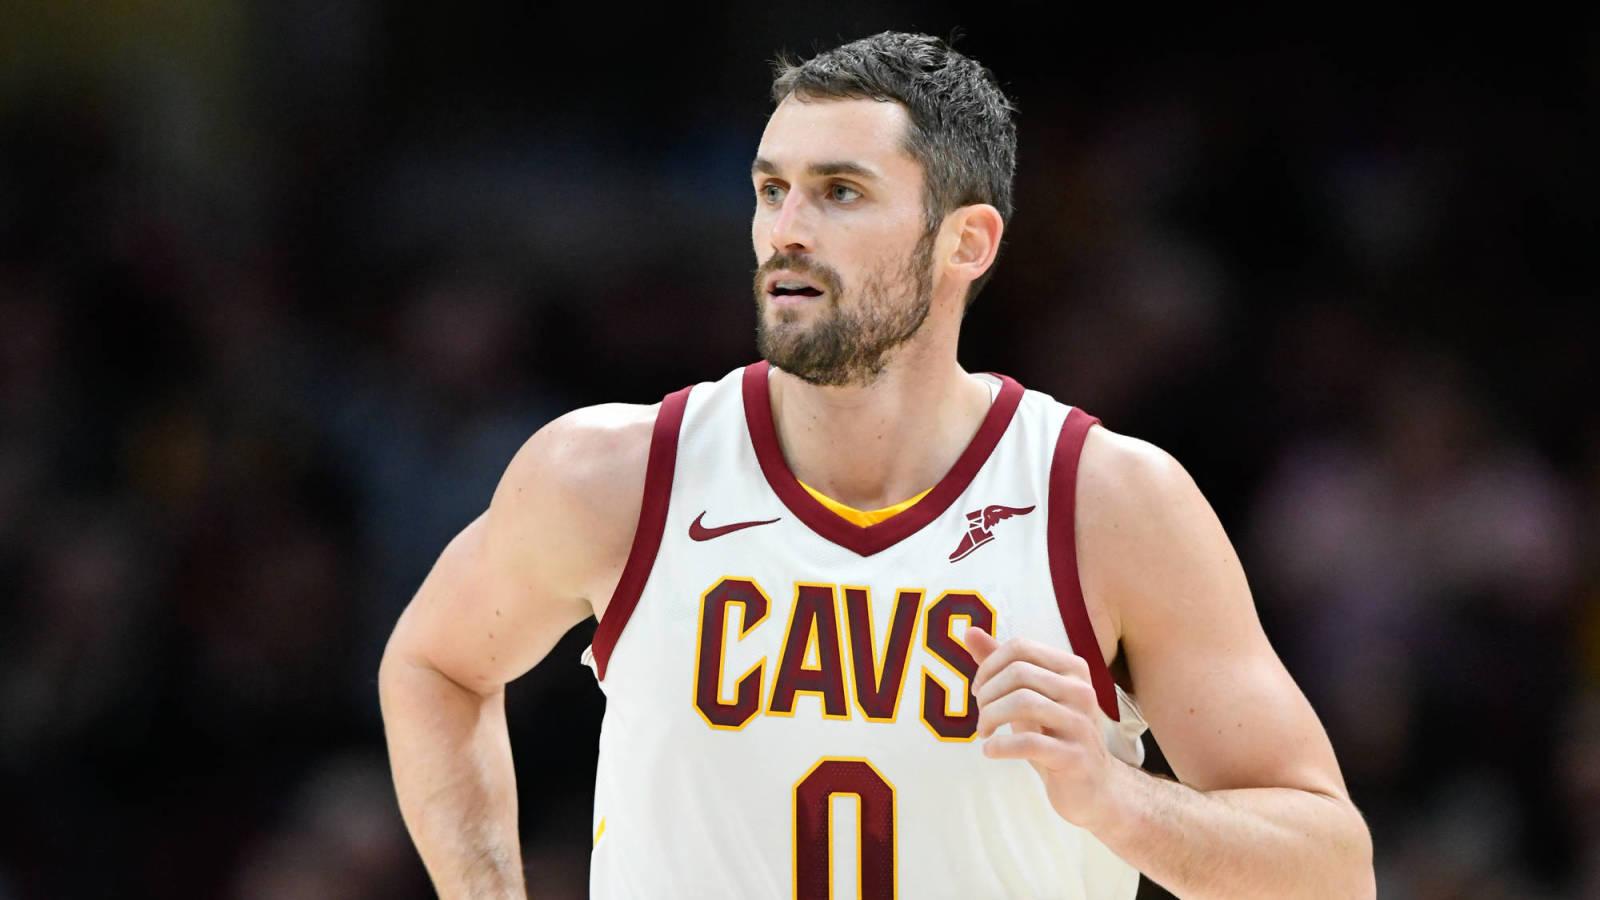 Kevin Love Cavs Computer Wallpaper 218 1600x900 px Picky